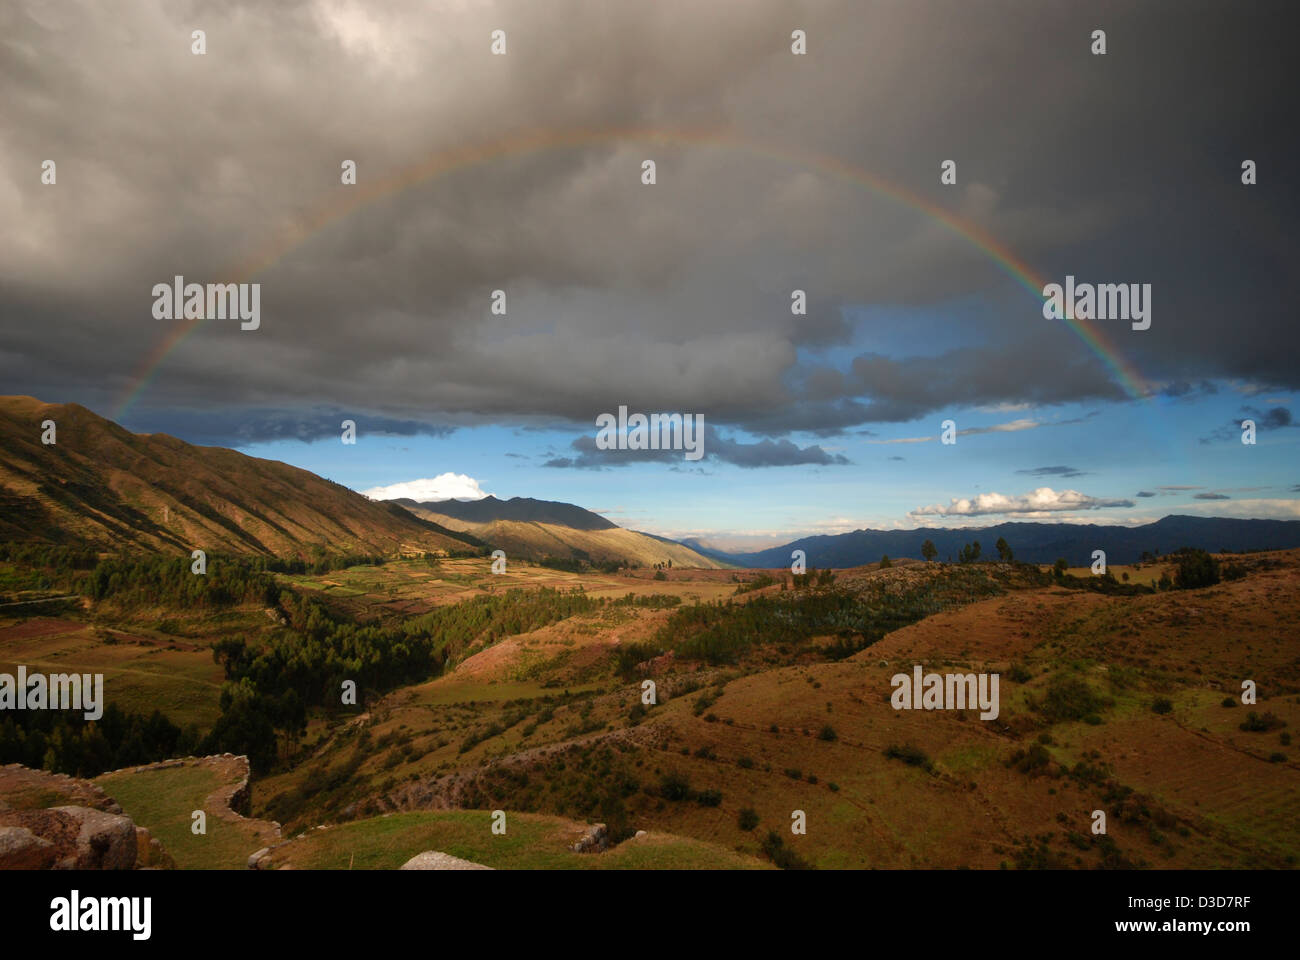 Andean landscape, with passing storm clouds and a rainbow over the hills Stock Photo